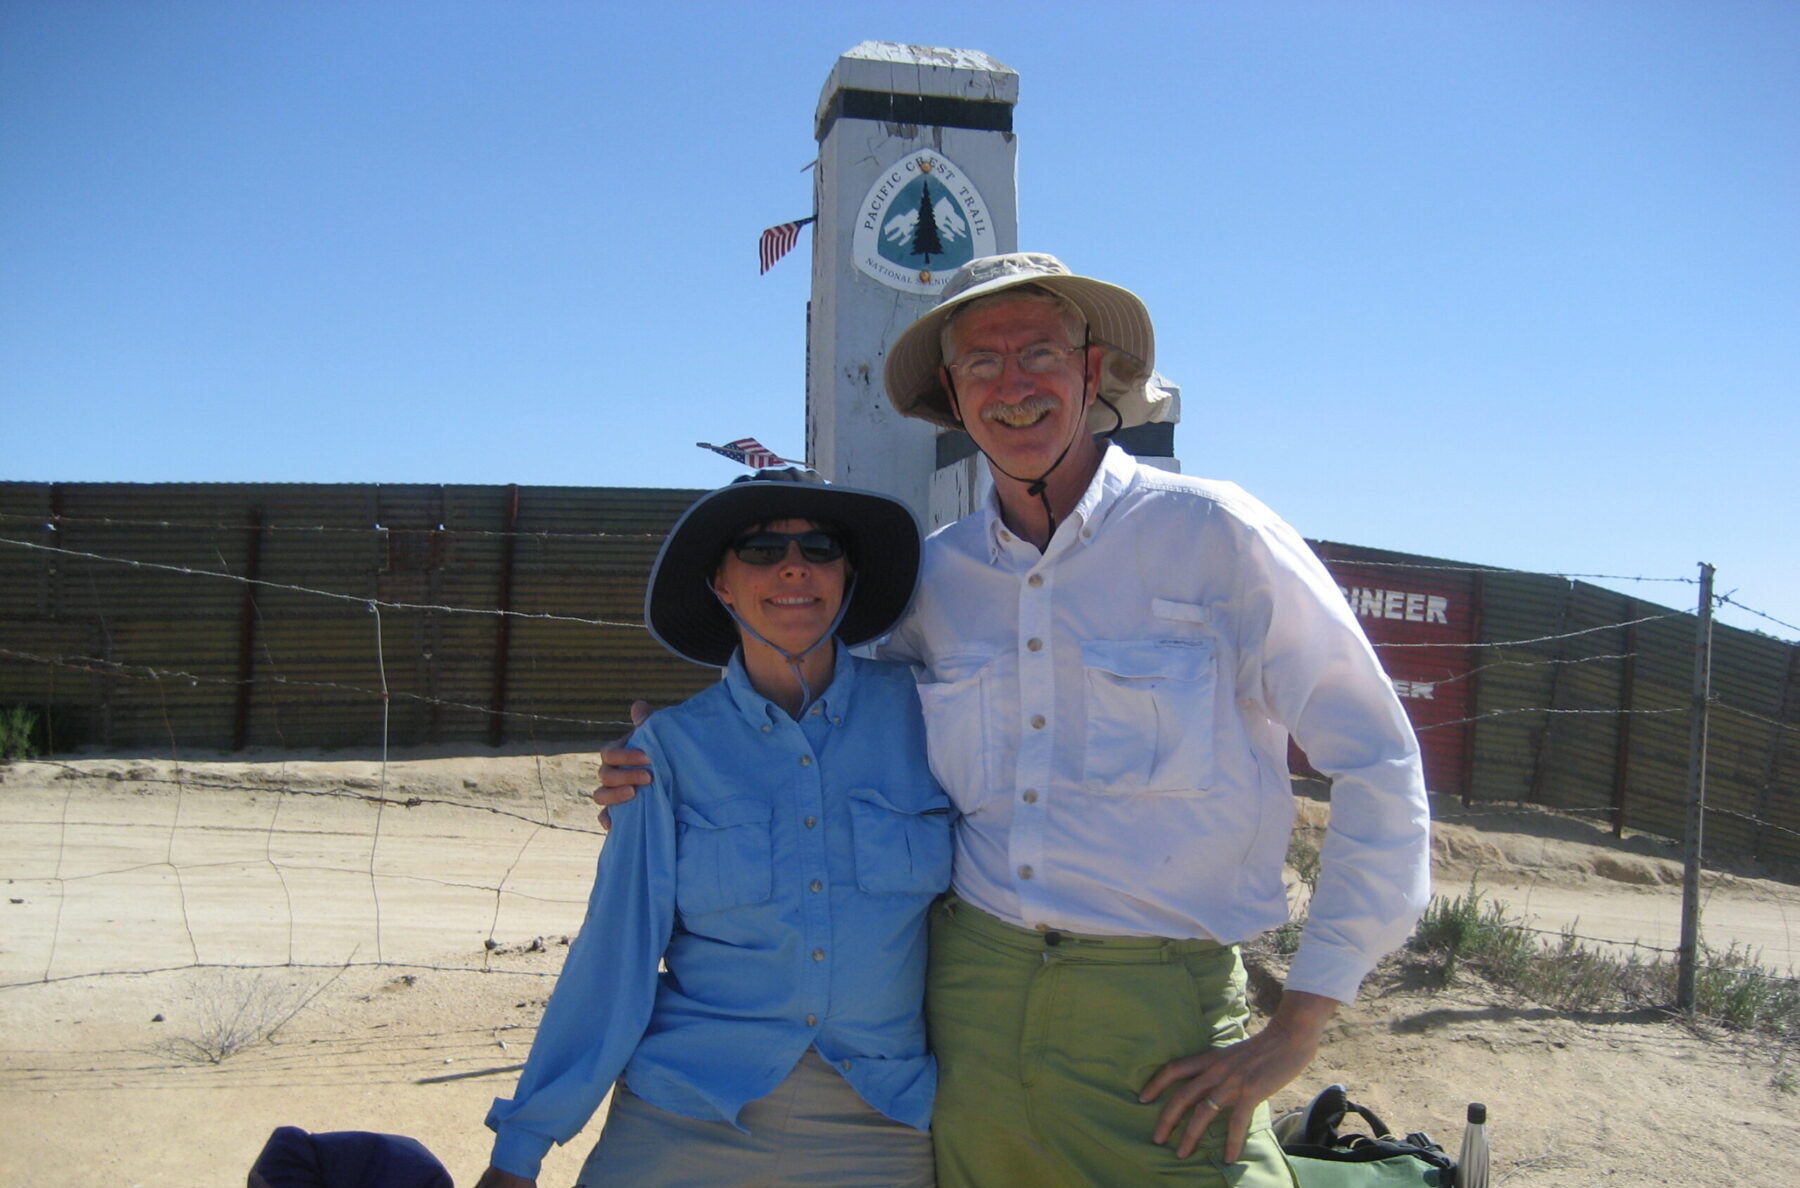 Barney and his wife Sandy at the Southern Terminus of the PCT